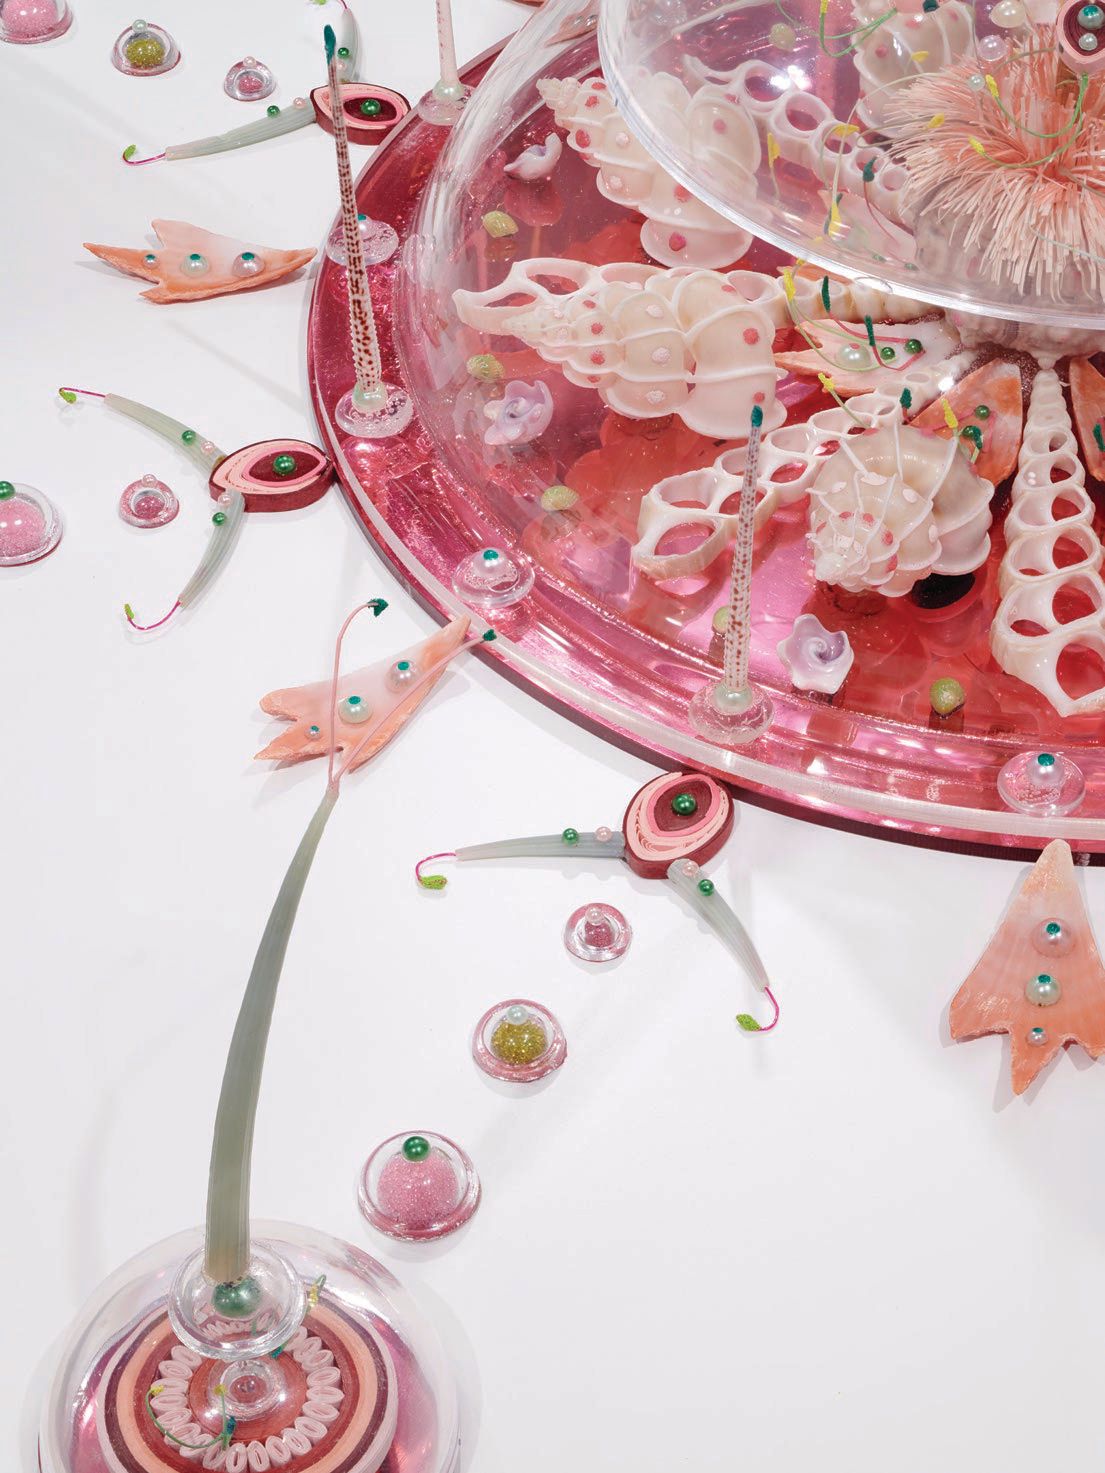 “Elegies of Proxima b” (2019, various cut and polished seashells, sea urchin spines, green tusks, squilla claws, butterfly wings, cut paper, colored powder pigments, colored plastic beads, acrylic domes, brass rod, colored mirrored Plexiglas, glue and acrylic on wood) image courtesy of the artist